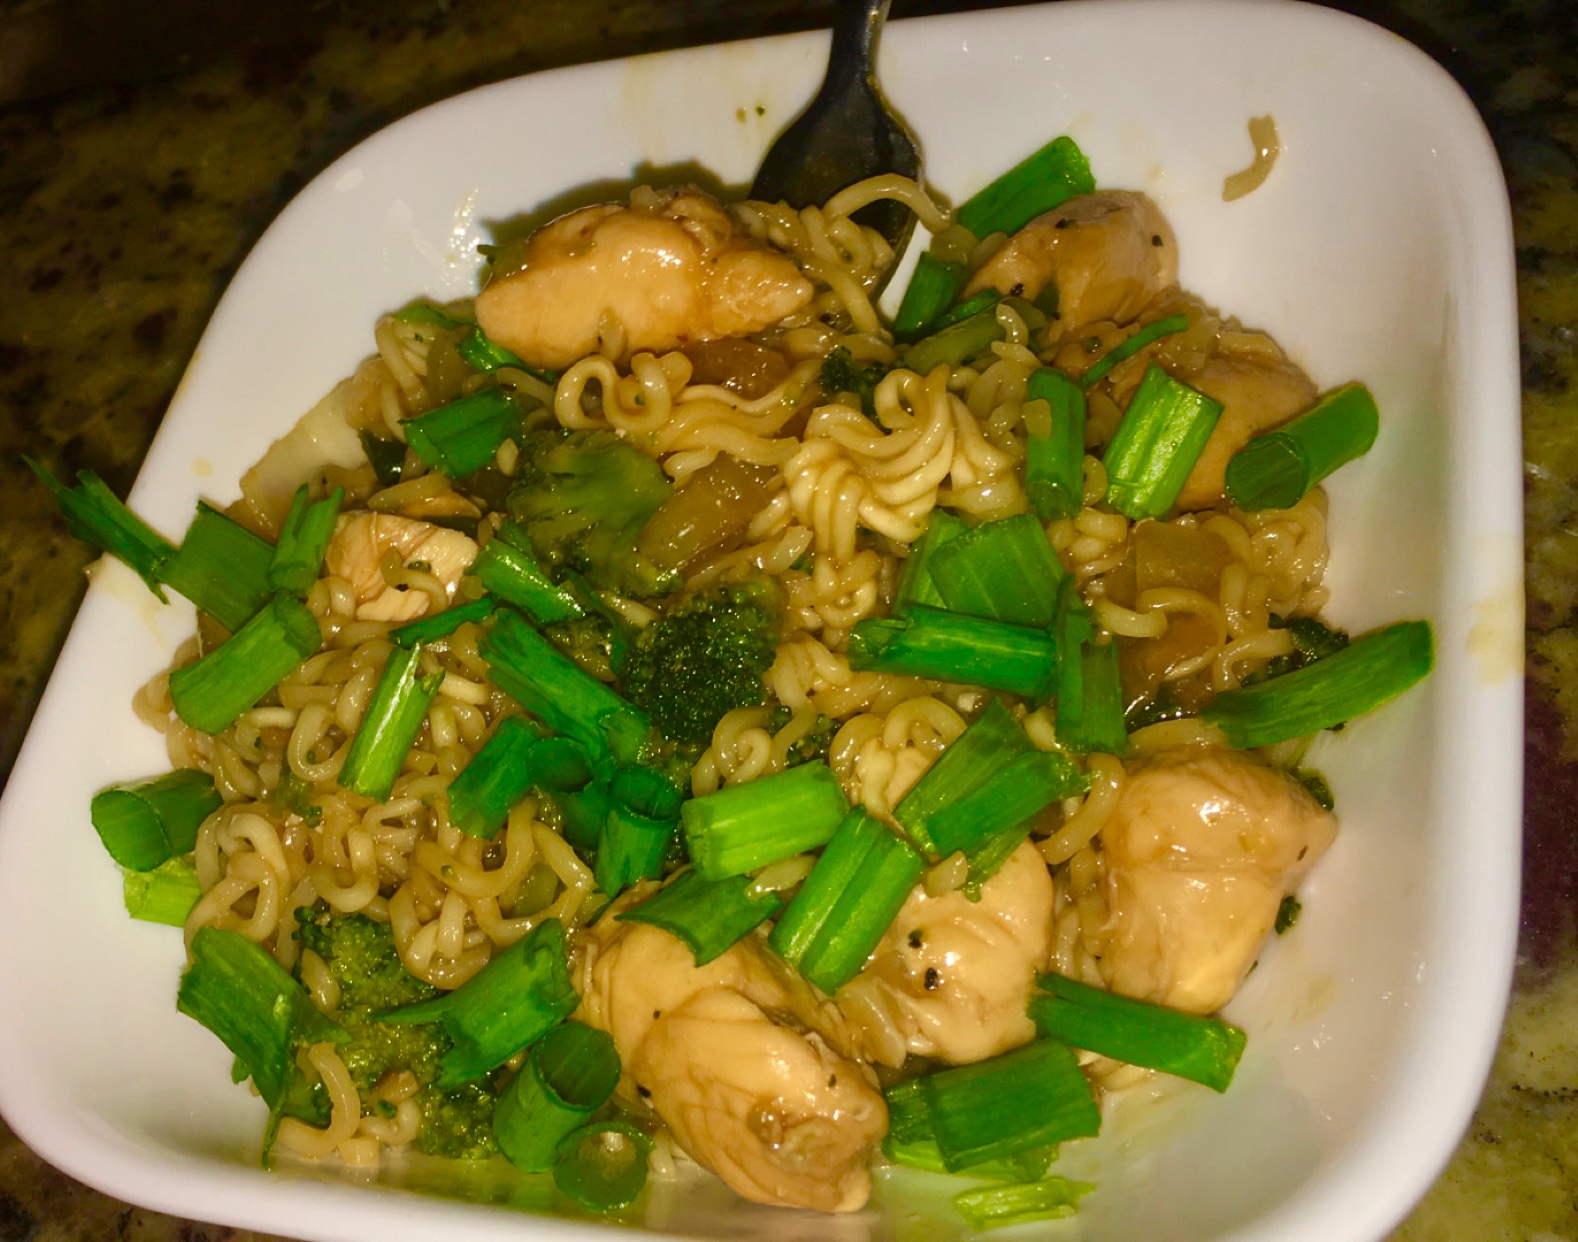 A bowl of teriyaki chicken with noodles and broccoli. Green onions are sprinkled on top.